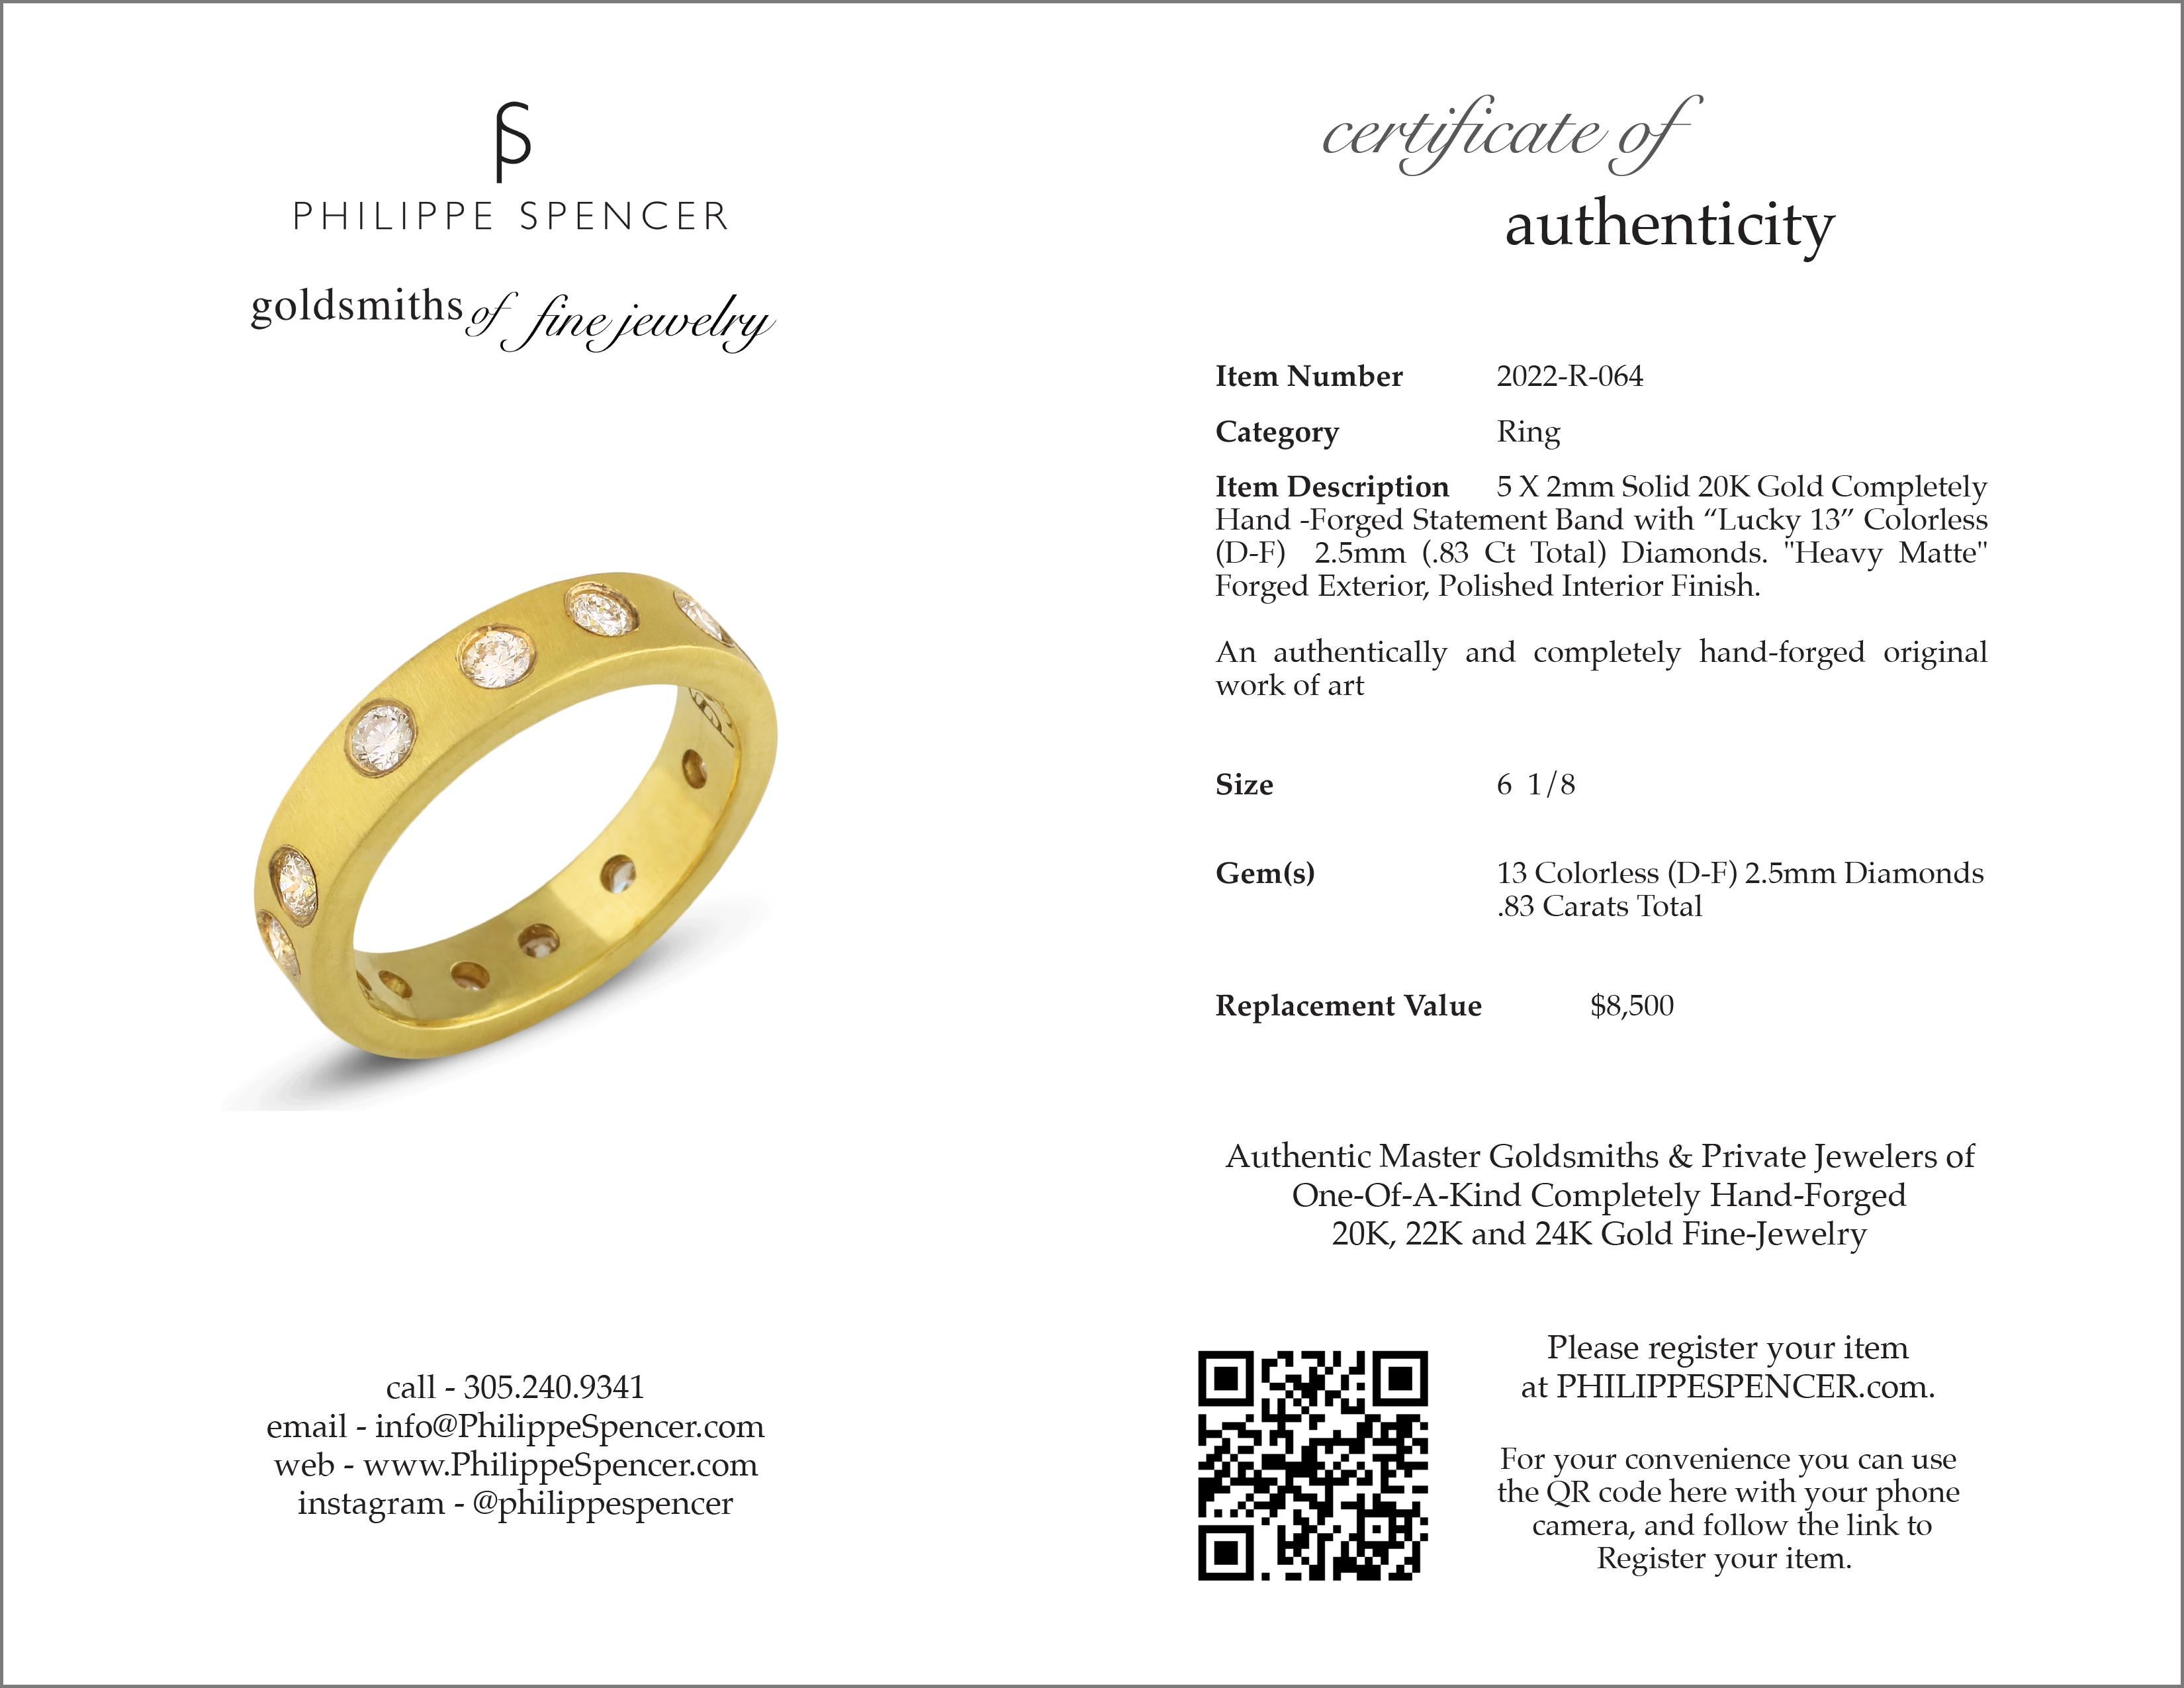 Artisan PHILIPPE SPENCER 20K Gold 5x2mm Band & “Lucky 13” COLORLESS Diamonds  For Sale